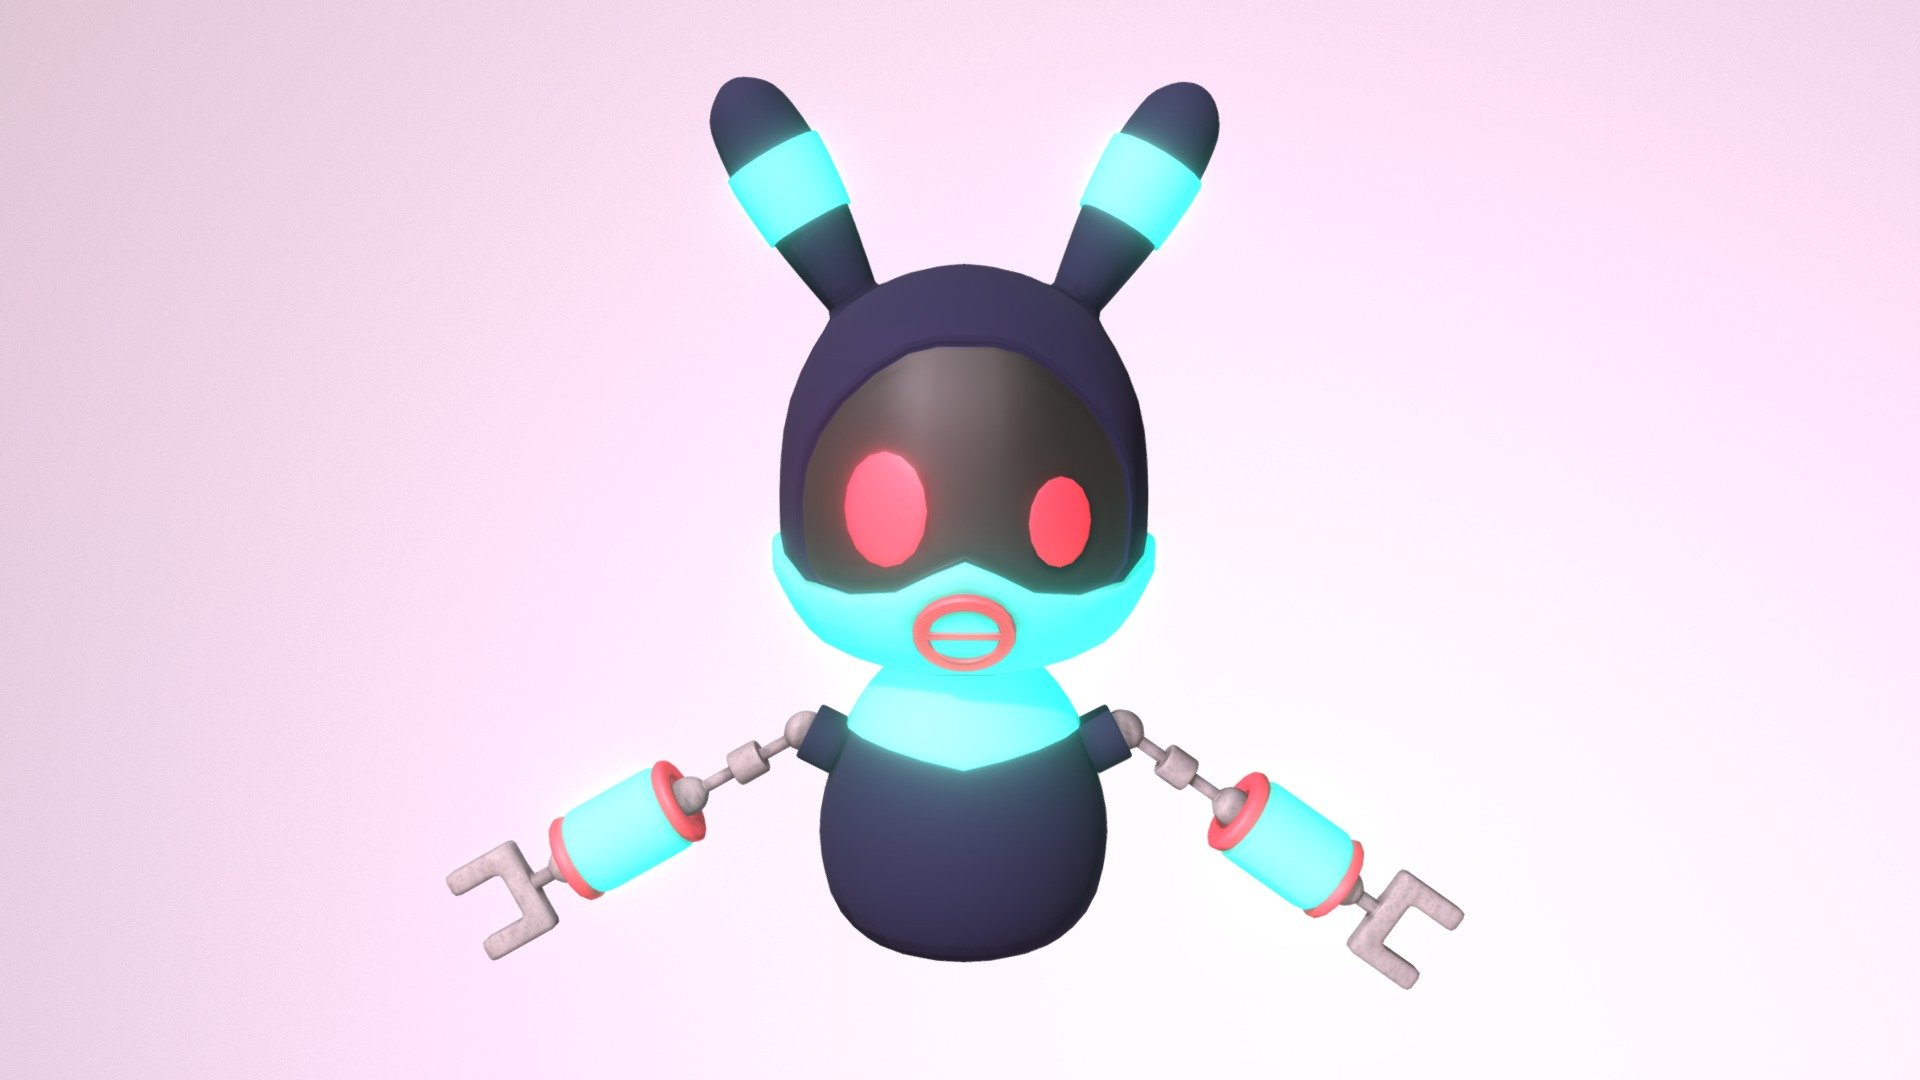 Robot Bunny Idle1 - 3D model by Sara Wong (@whatswongwithme) 3d model